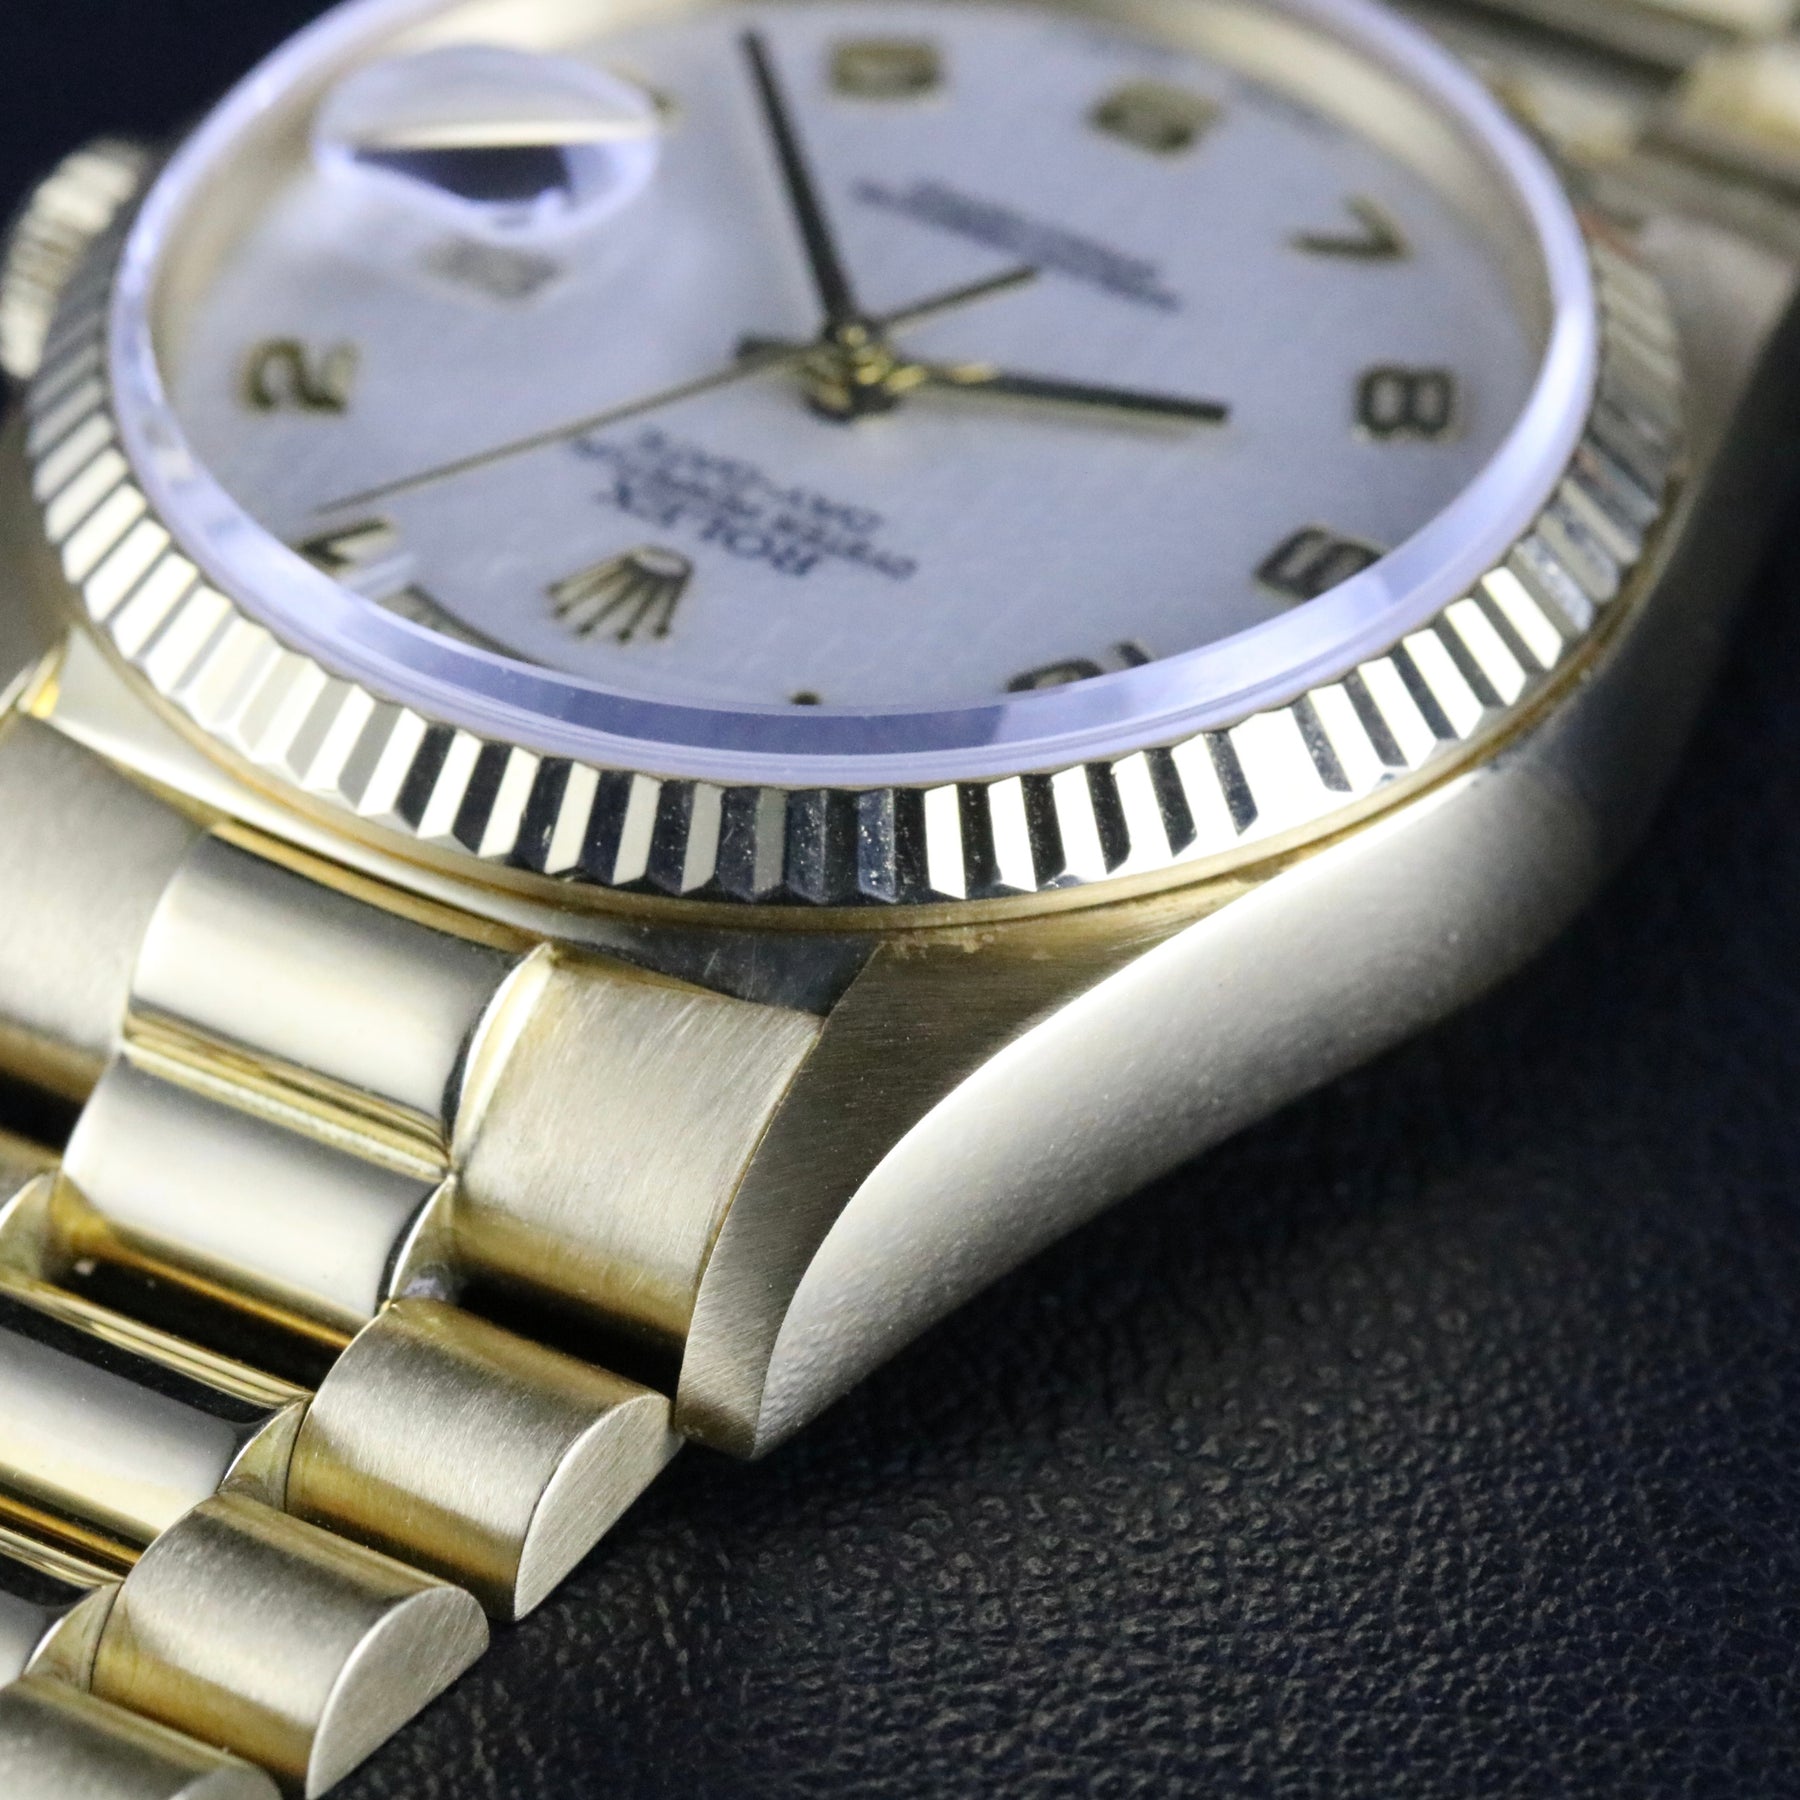 1986 Rolex 18038 36mm Yellow Gold Daydate White Computer Dial